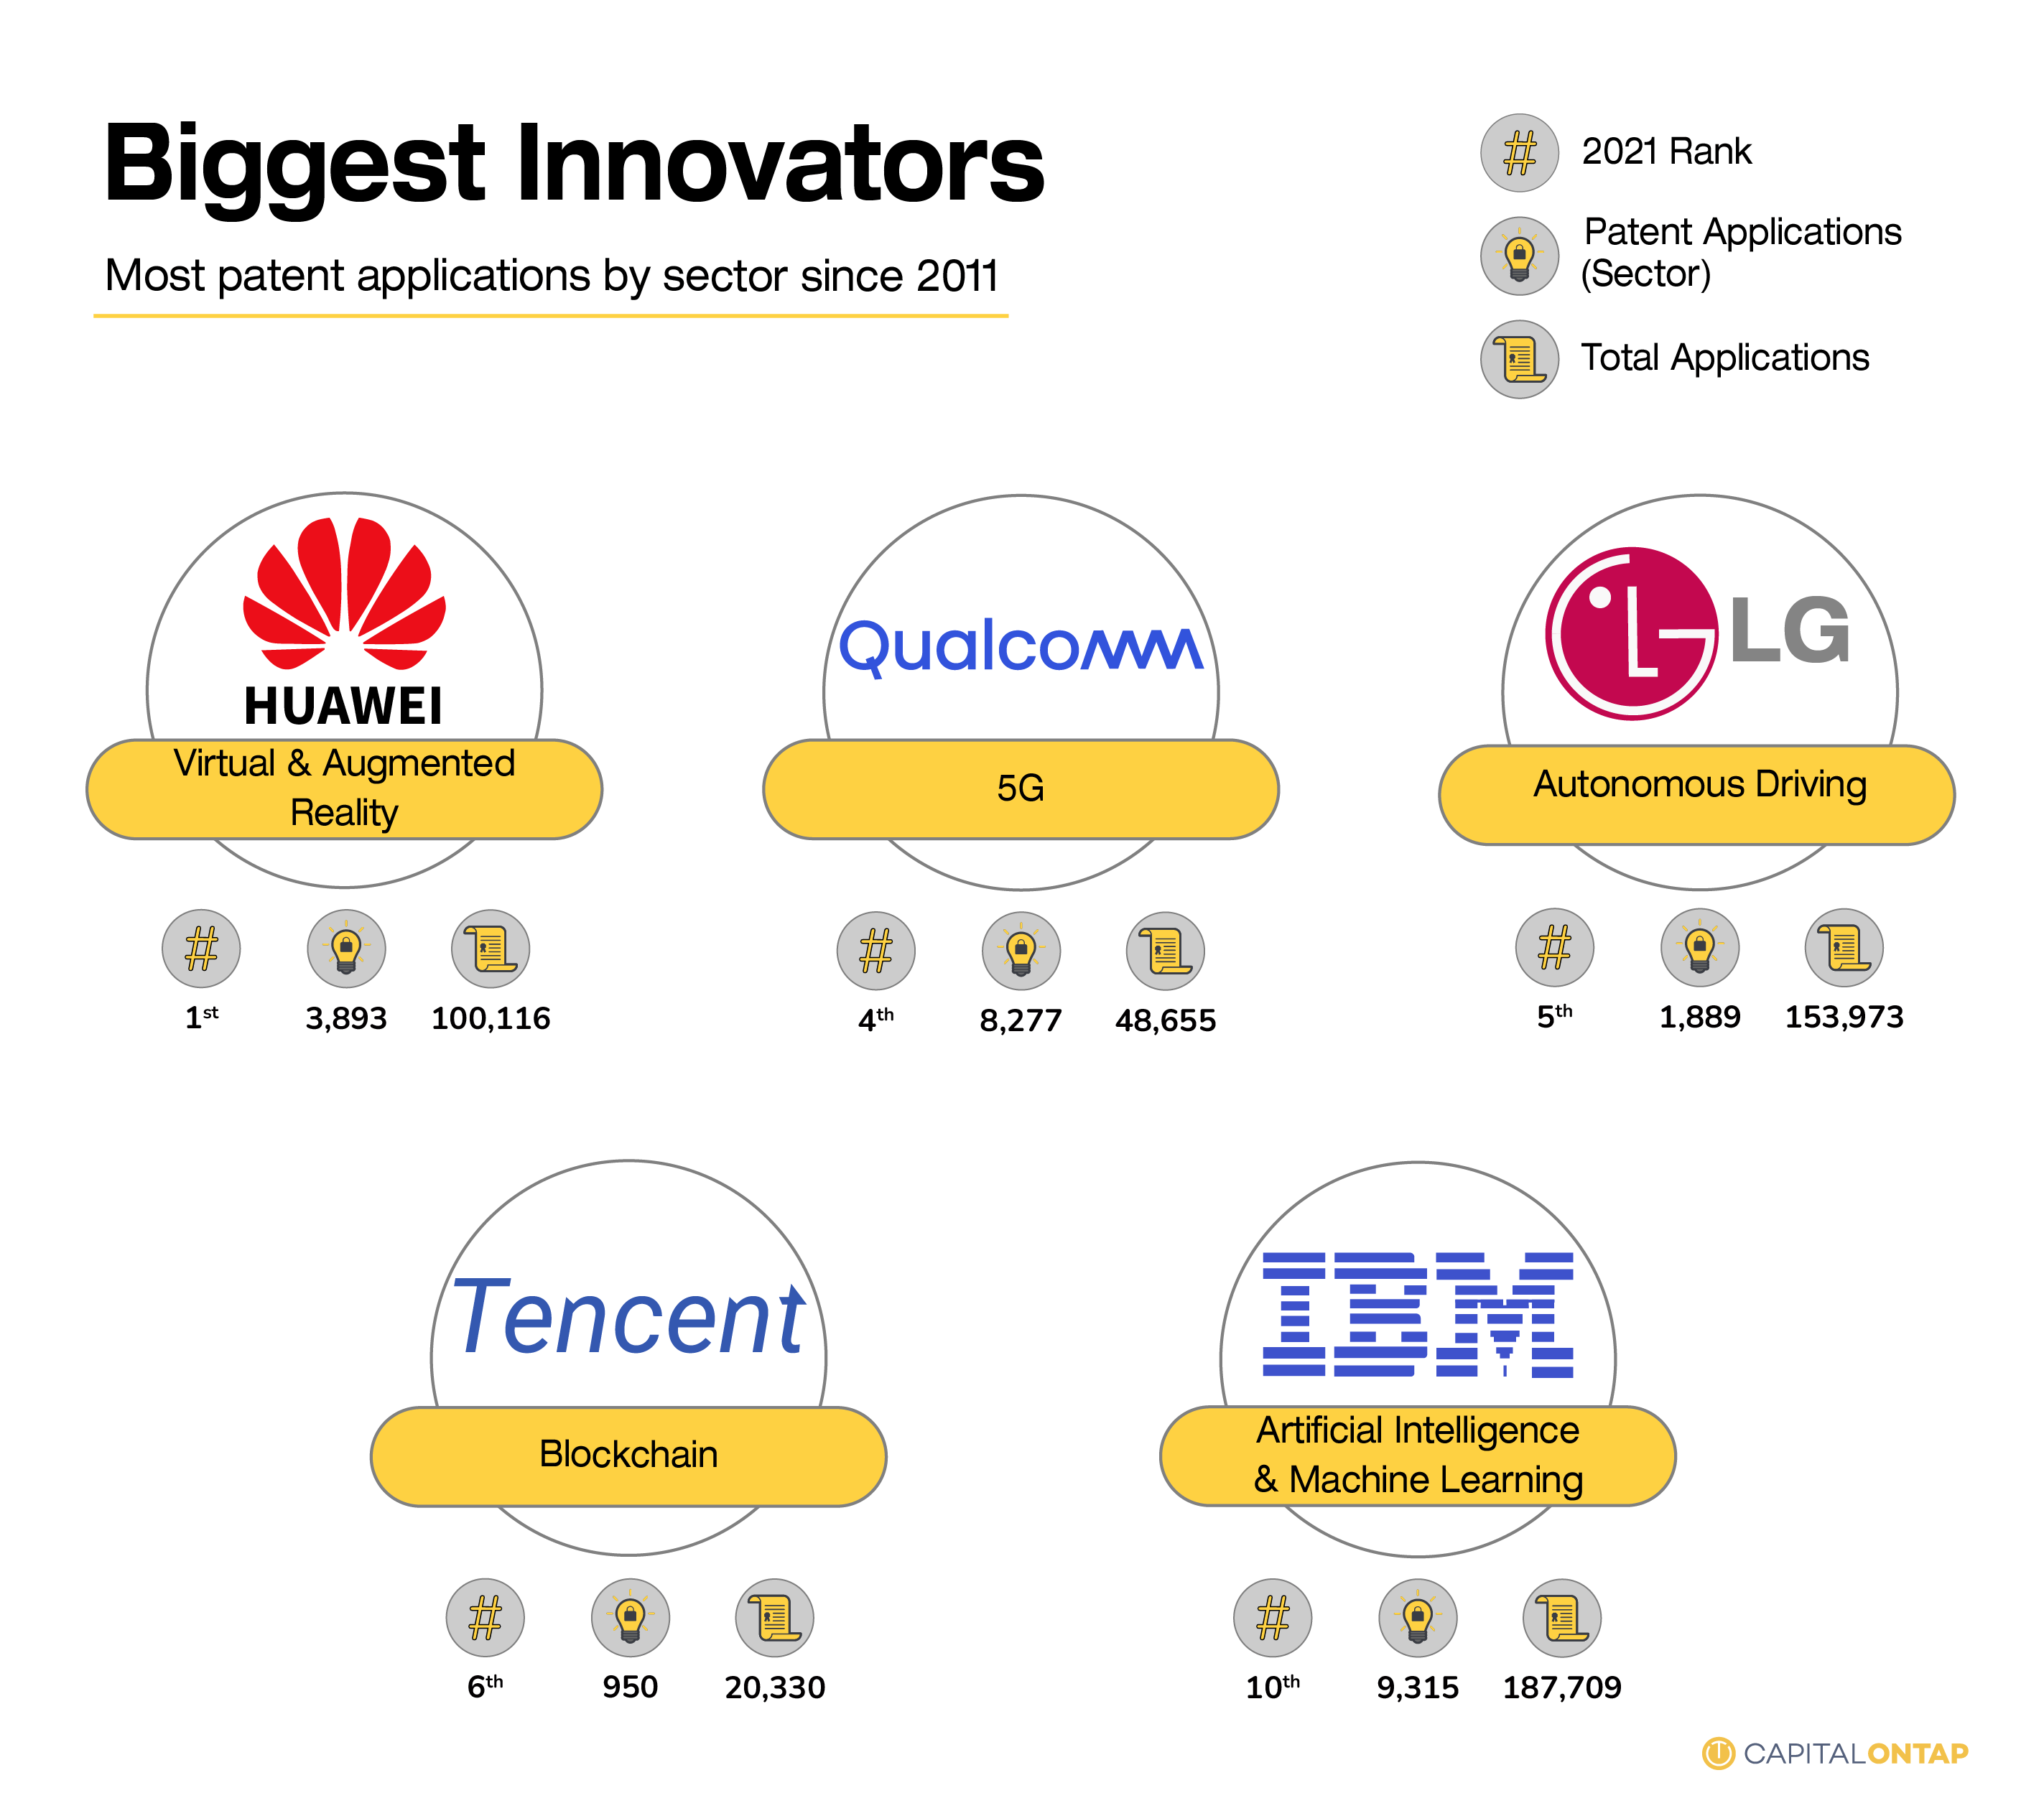 Top 5 companies with the most patent applications: Huawei, Qualcomm, LG, Tencent, and IBM